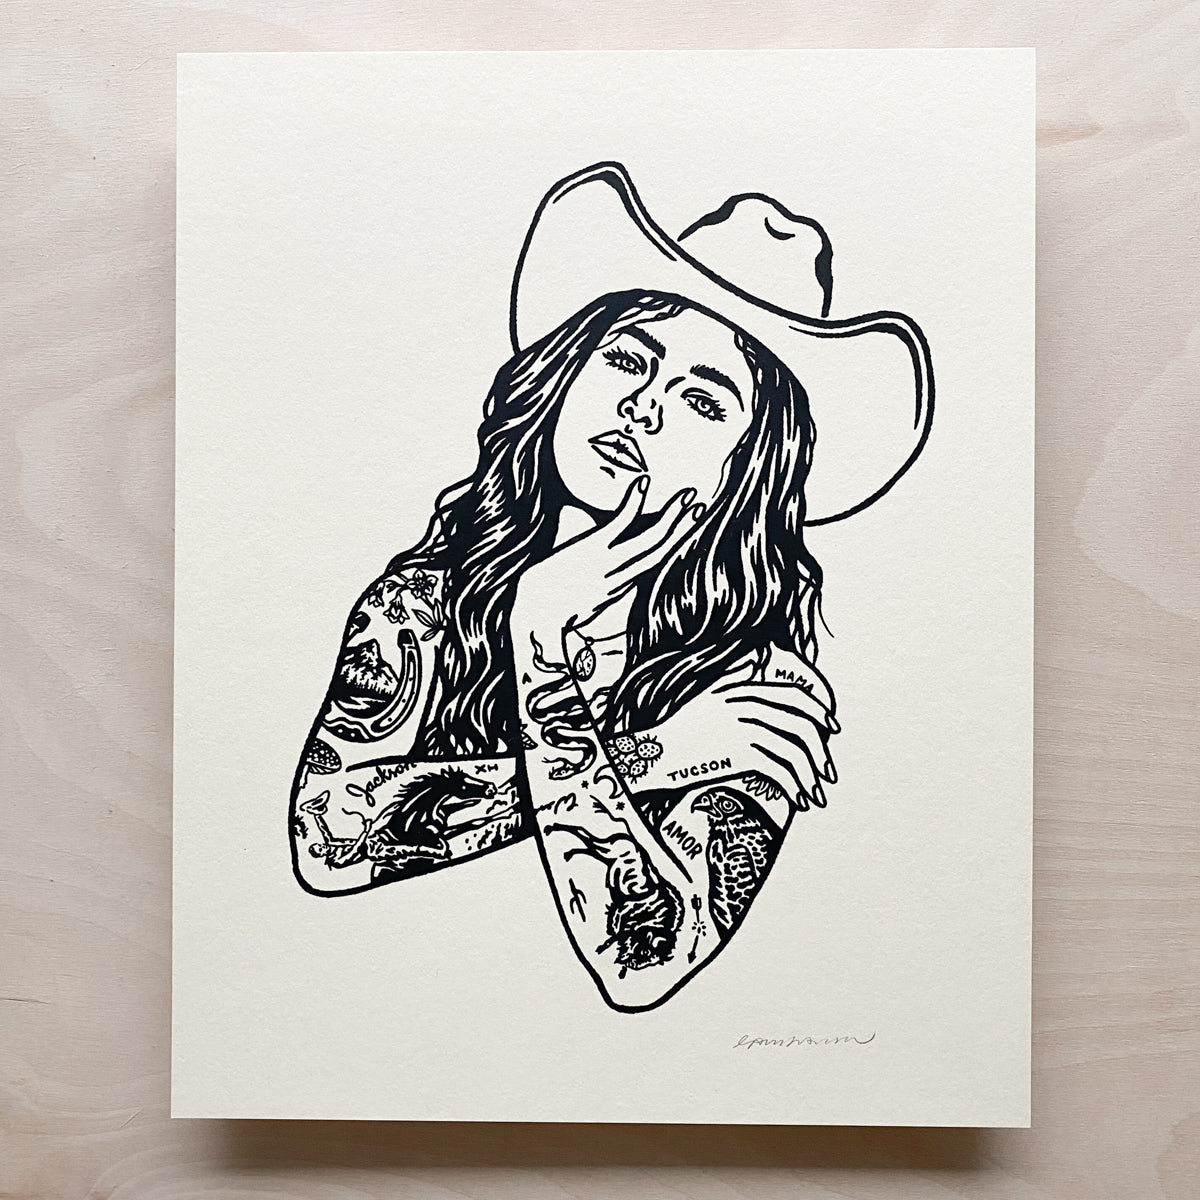 Tattooed Cowgirl 3 - Signed 8x10in Print #346